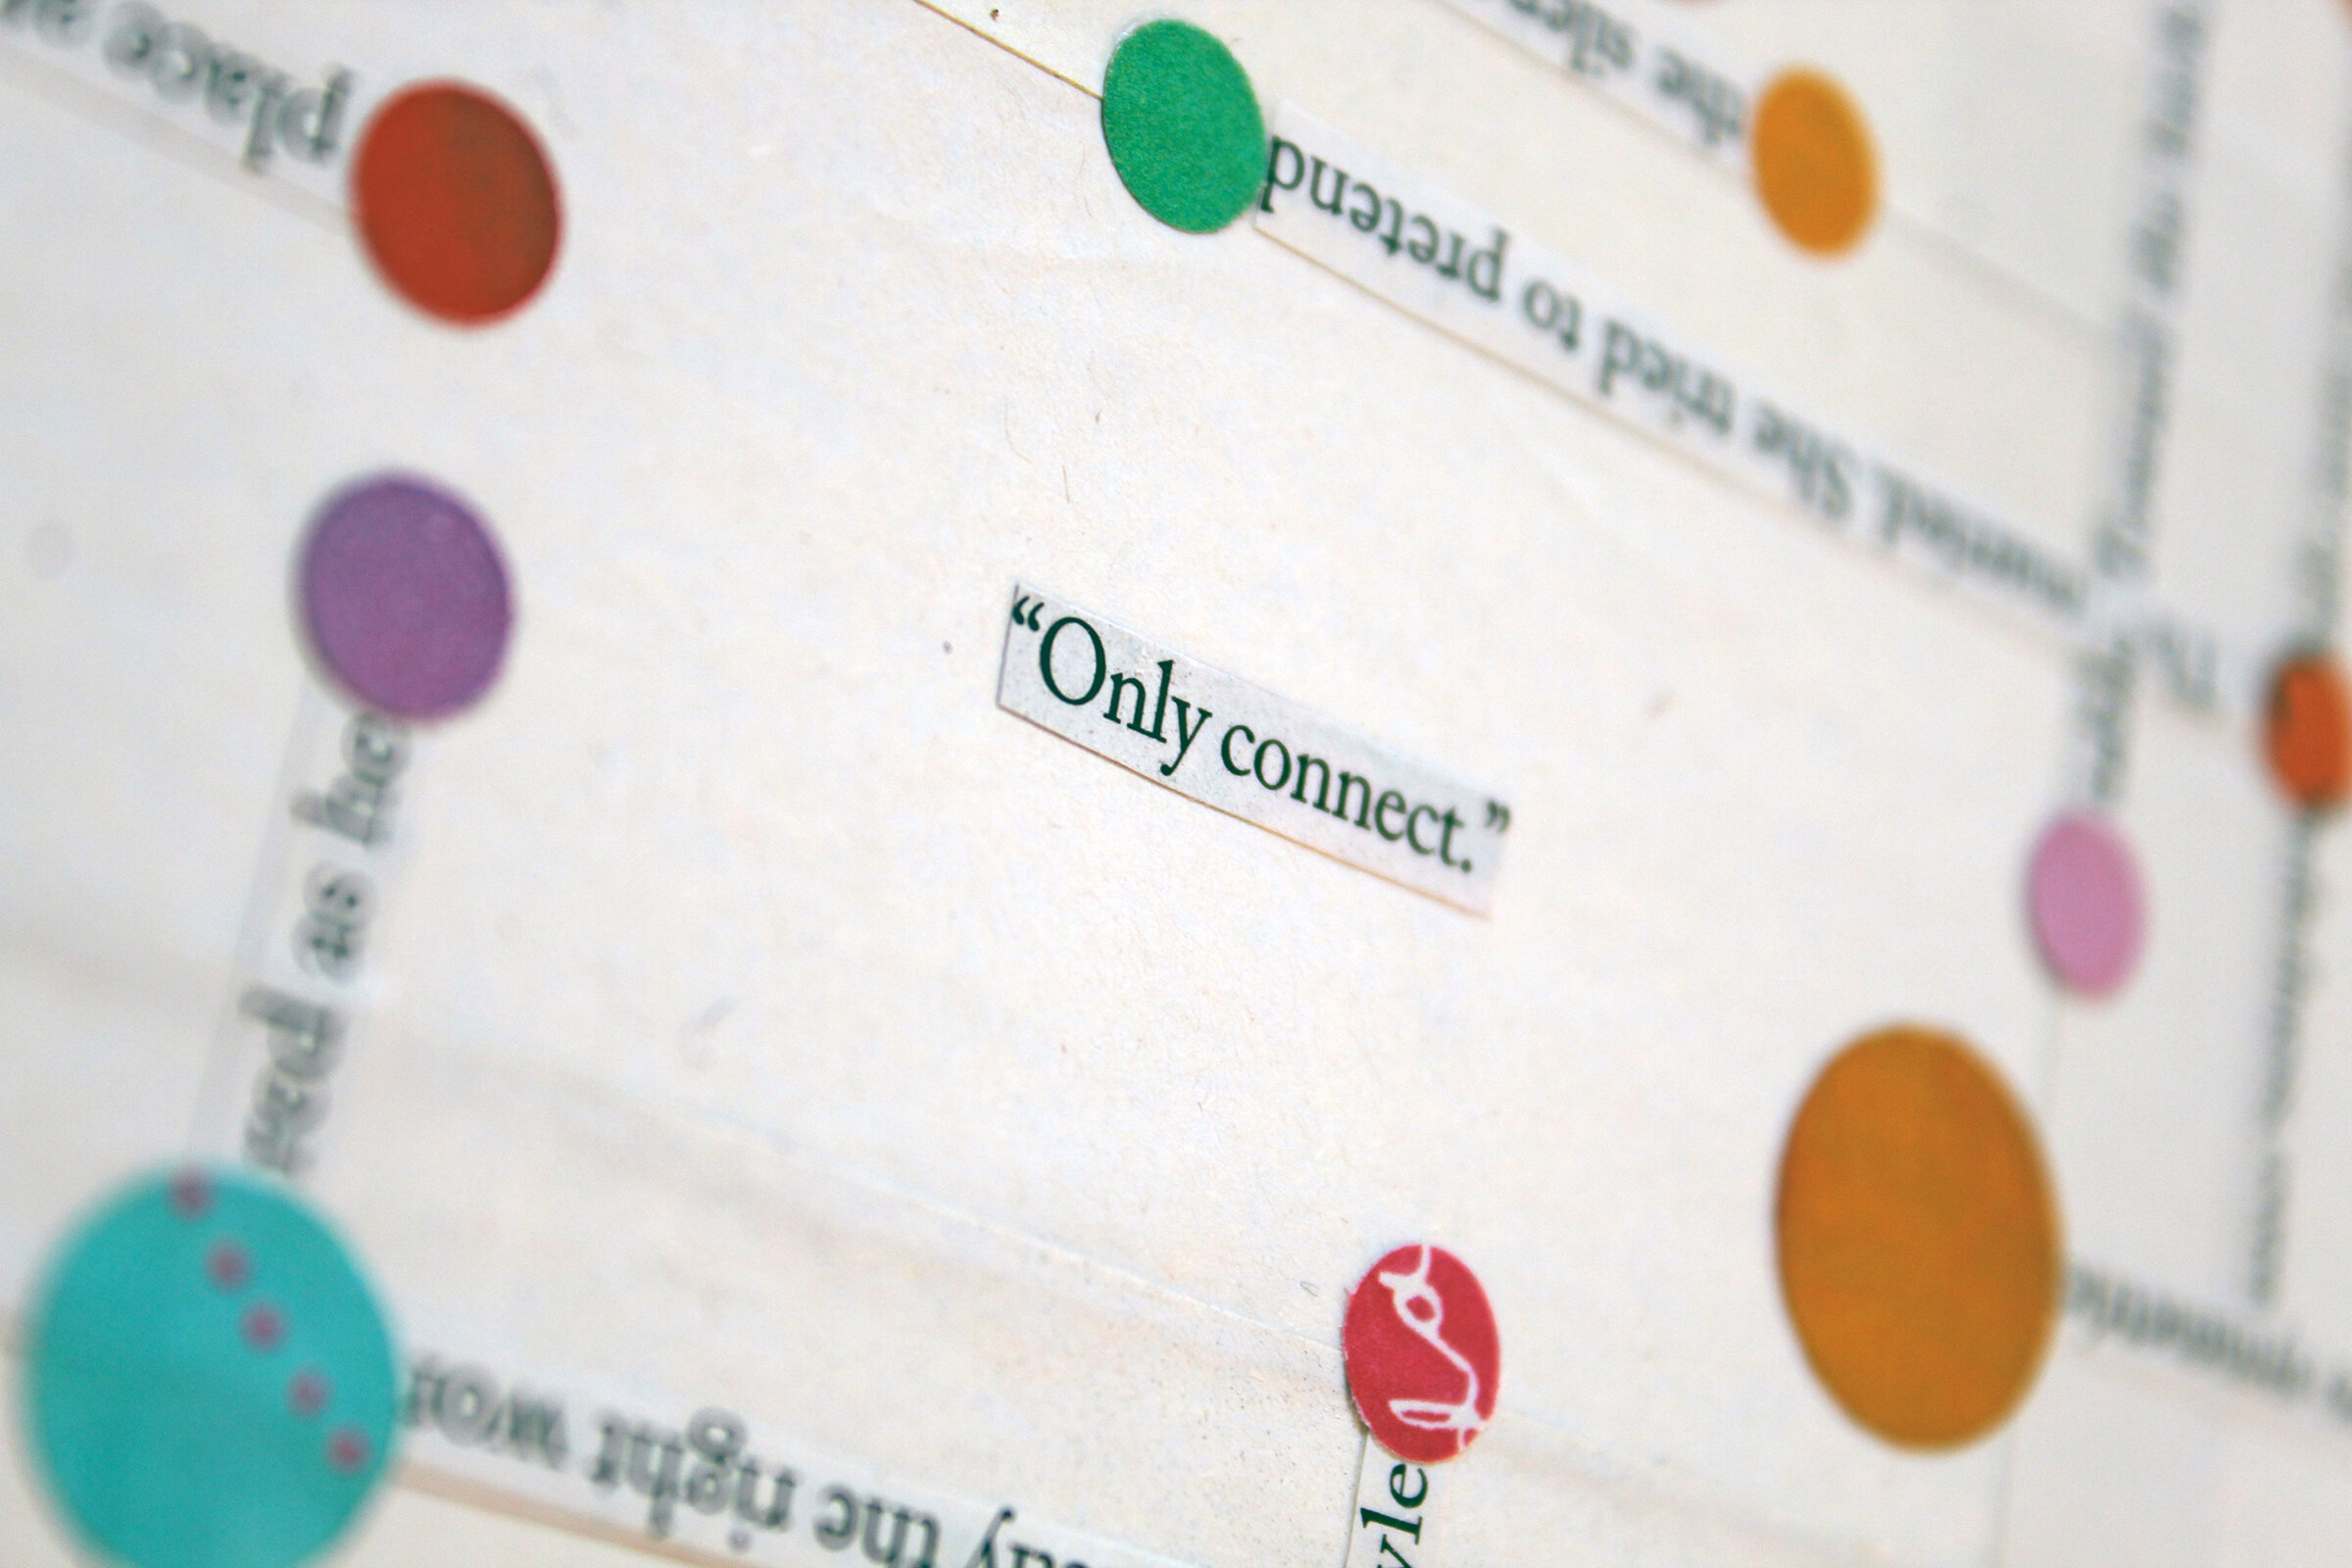  Detail – “Only connect.” 